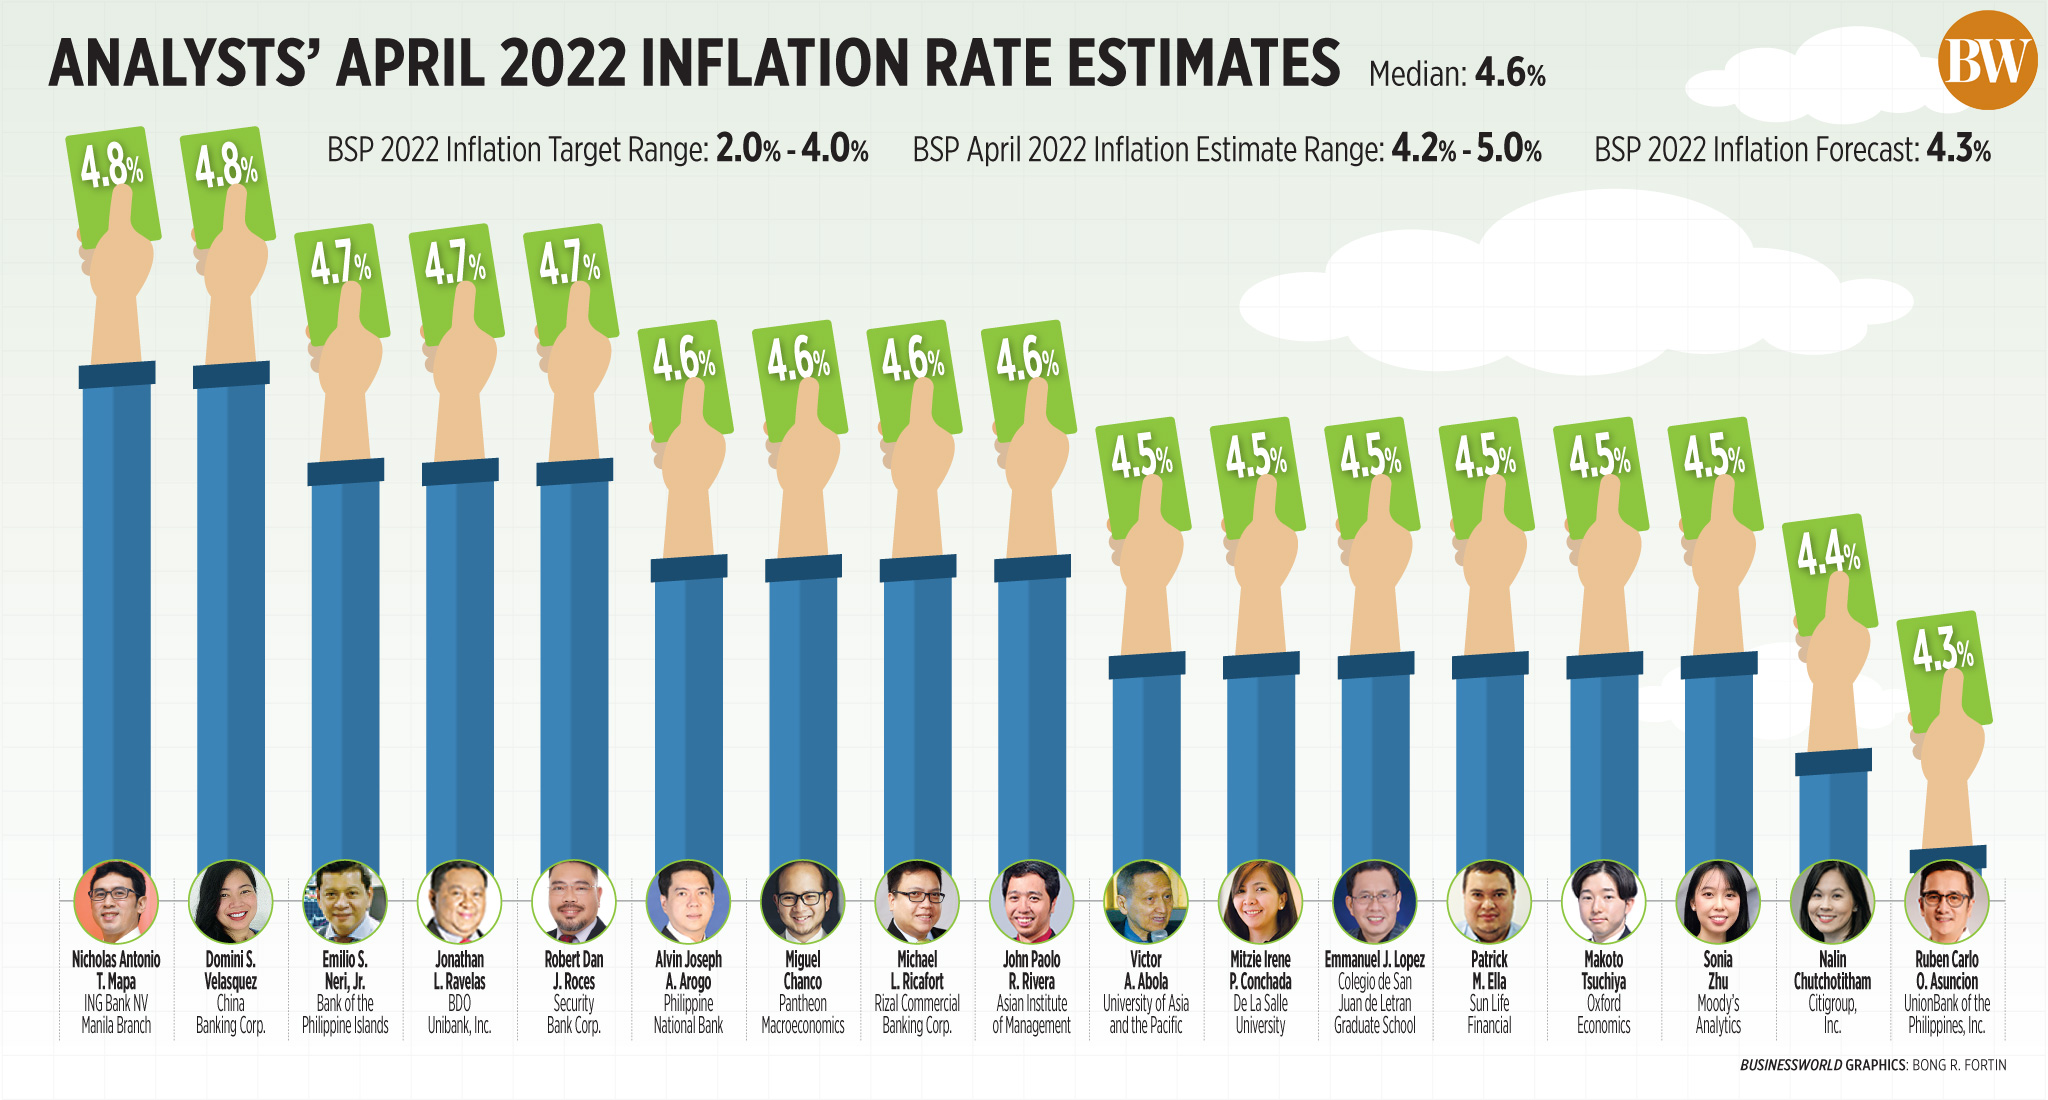 Analysts’ April 2022 inflation rate estimates